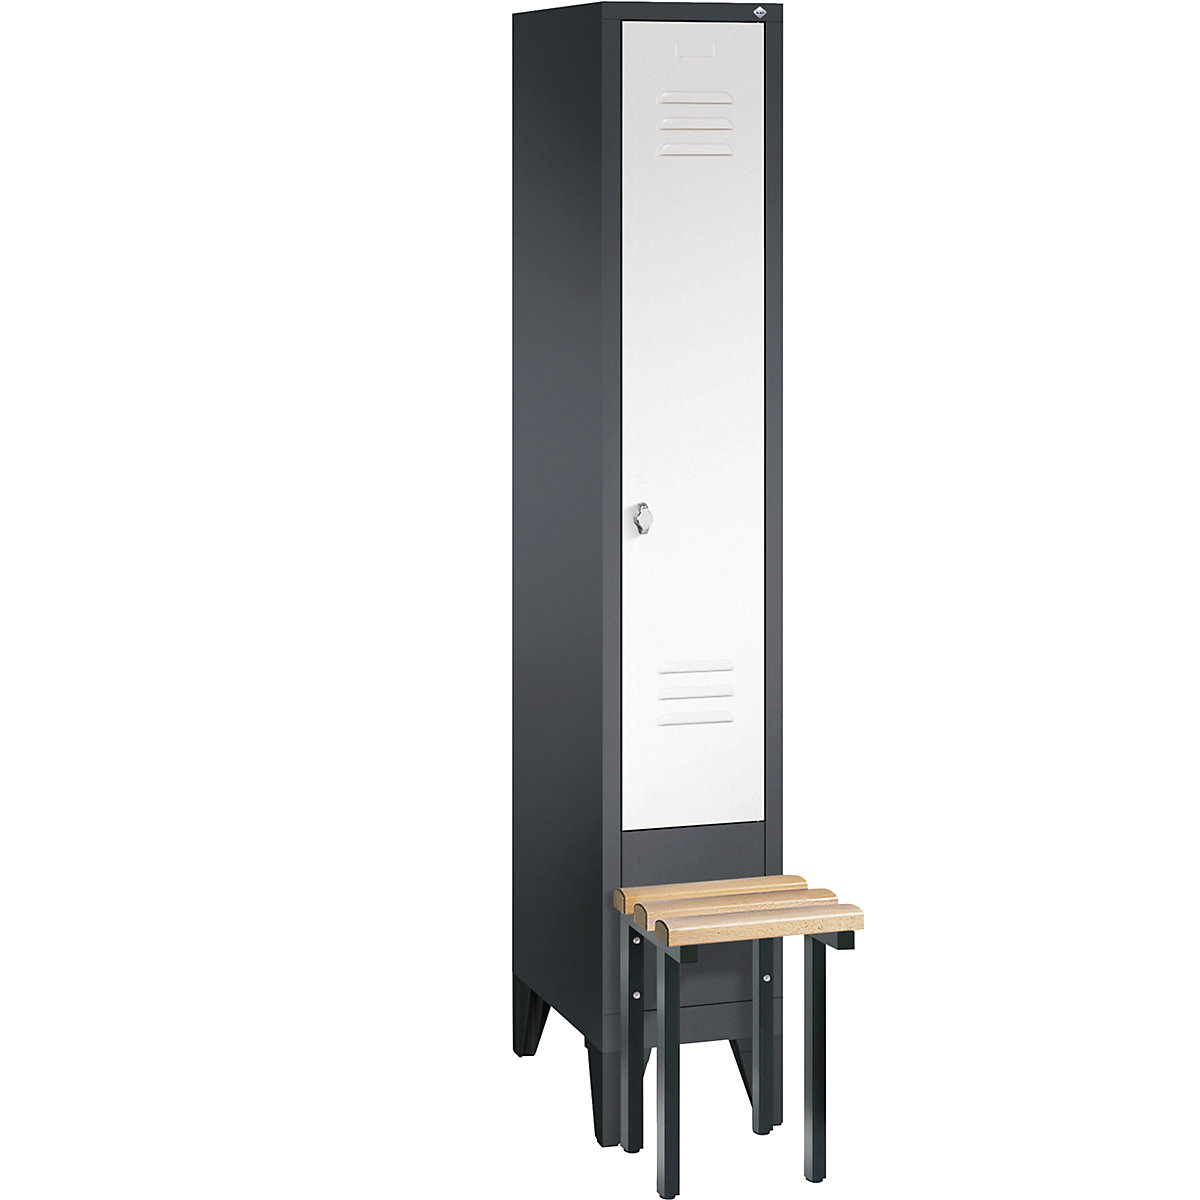 CLASSIC cloakroom locker with bench mounted in front – C+P, 1 compartment, compartment width 300 mm, black grey / traffic white-13